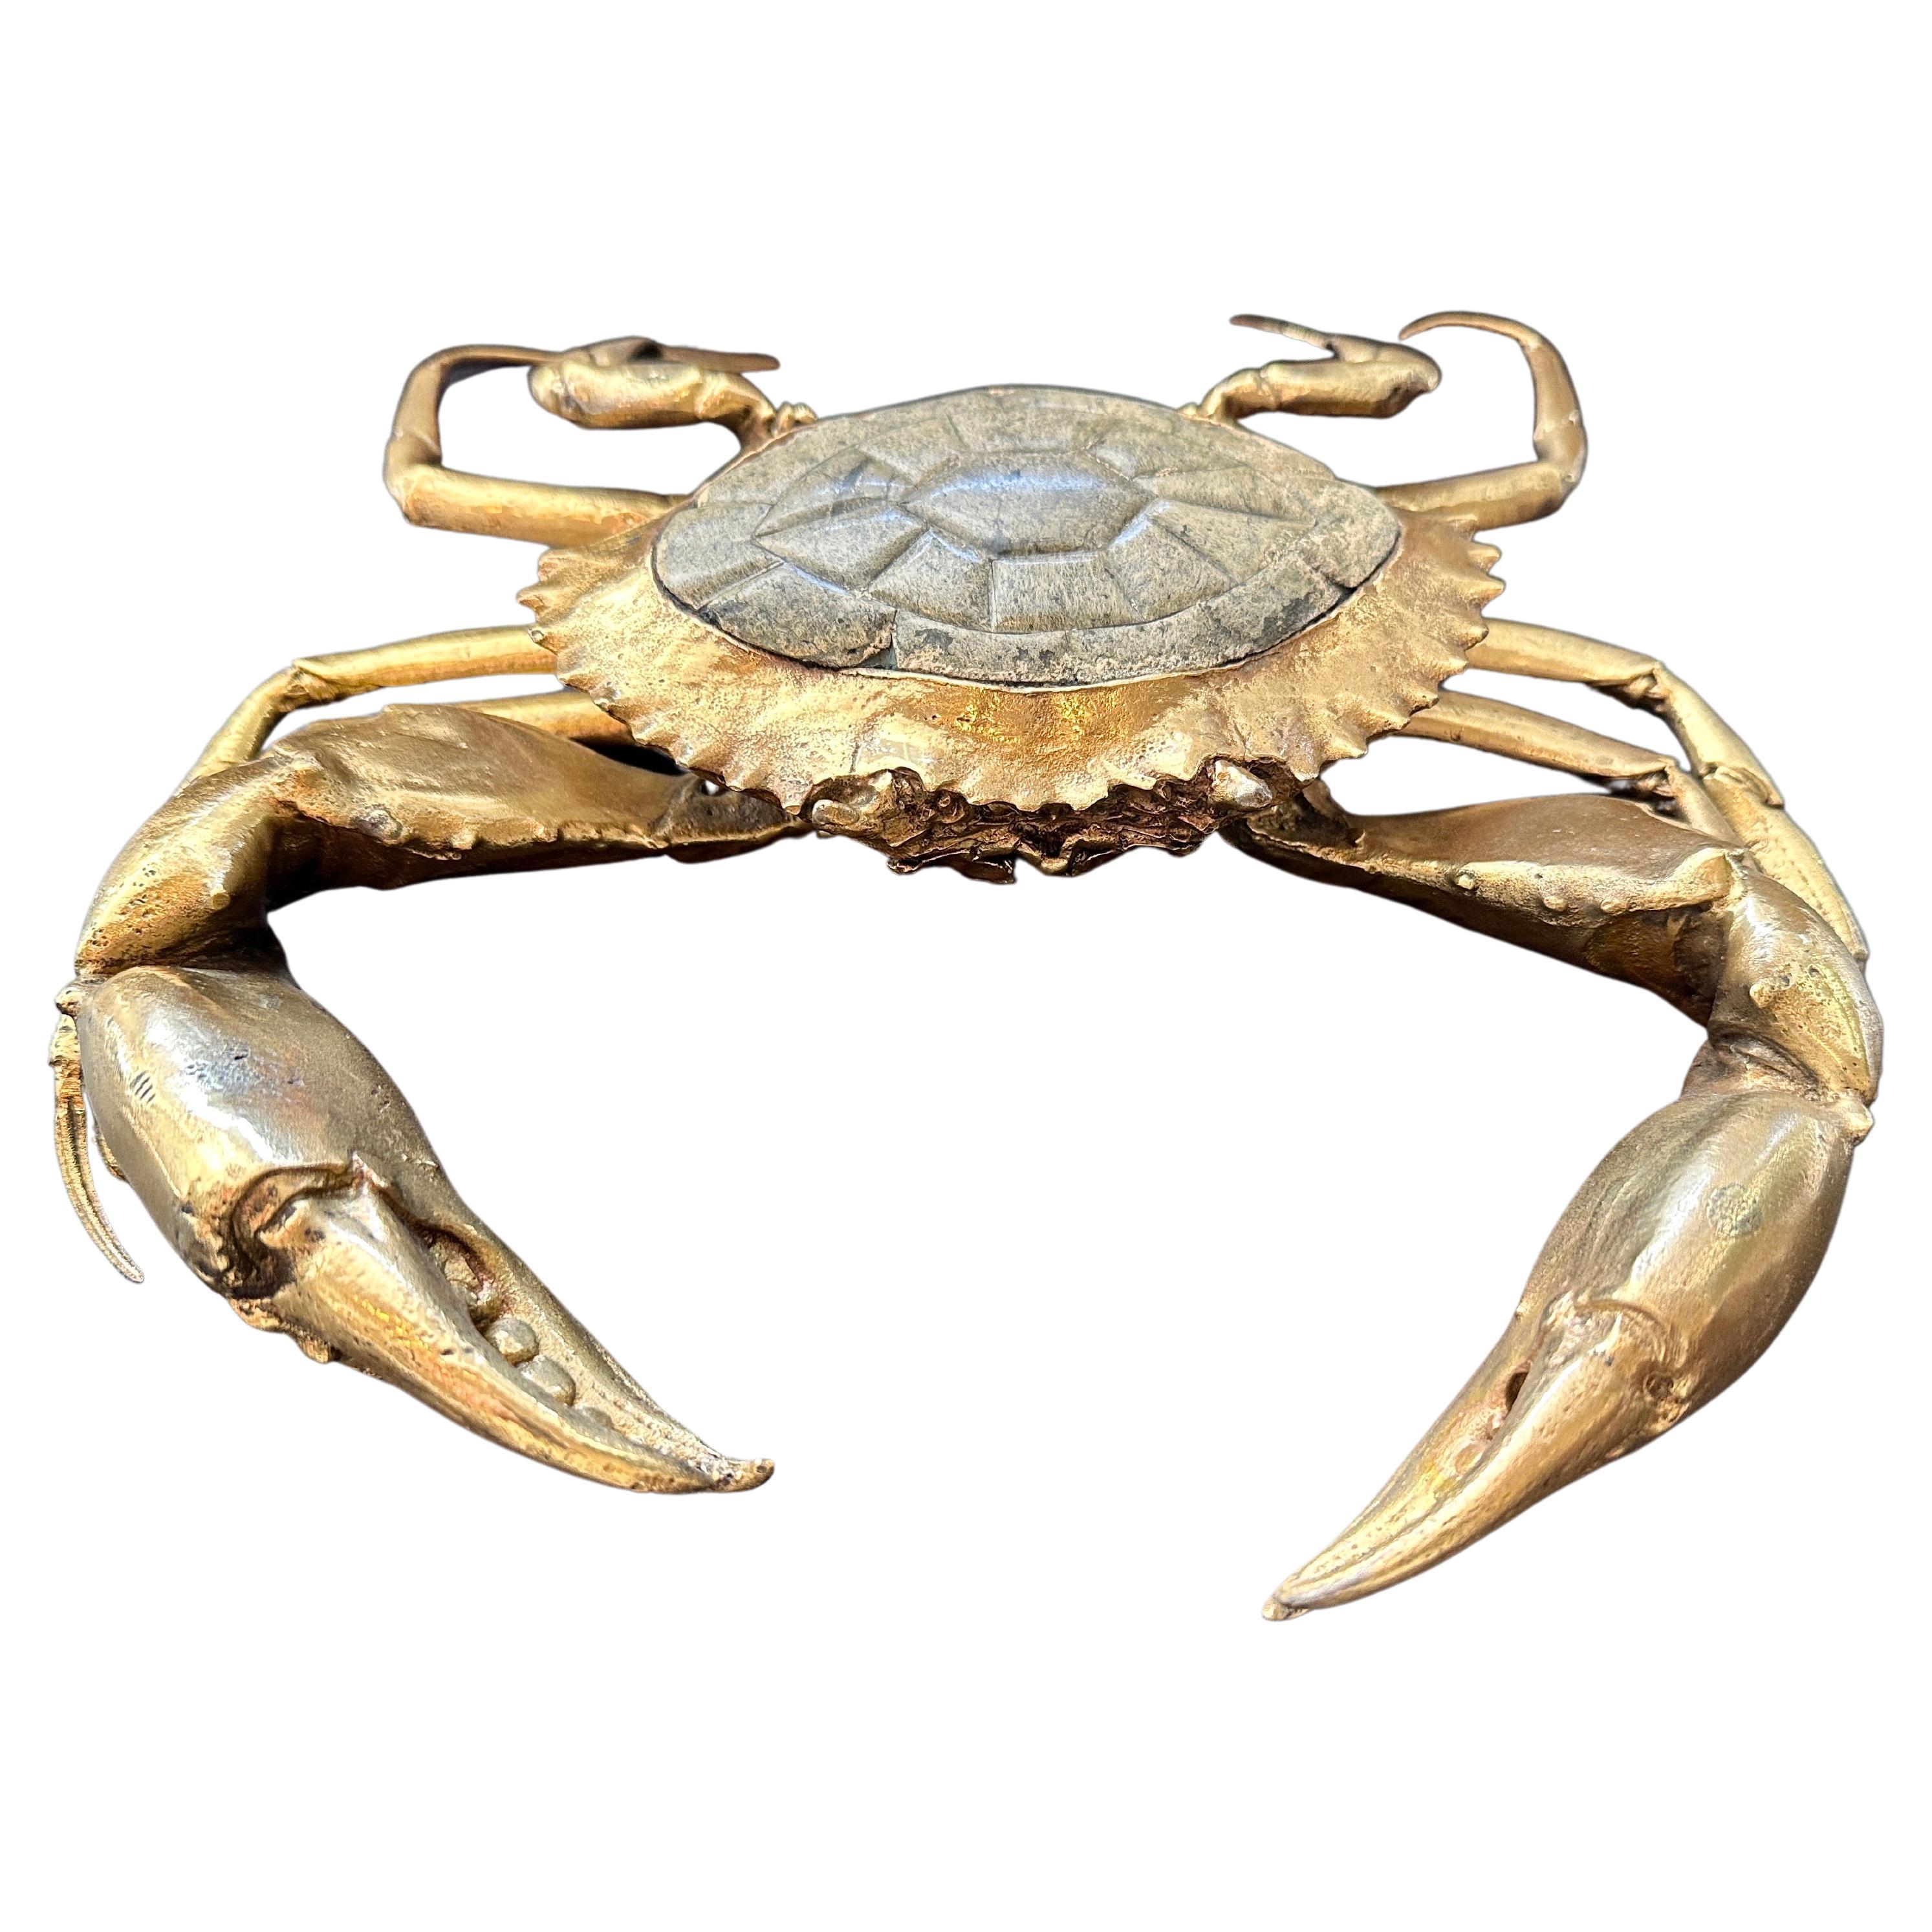 Bronze & Stone Dungeness Crab Table Sculpture For Sale